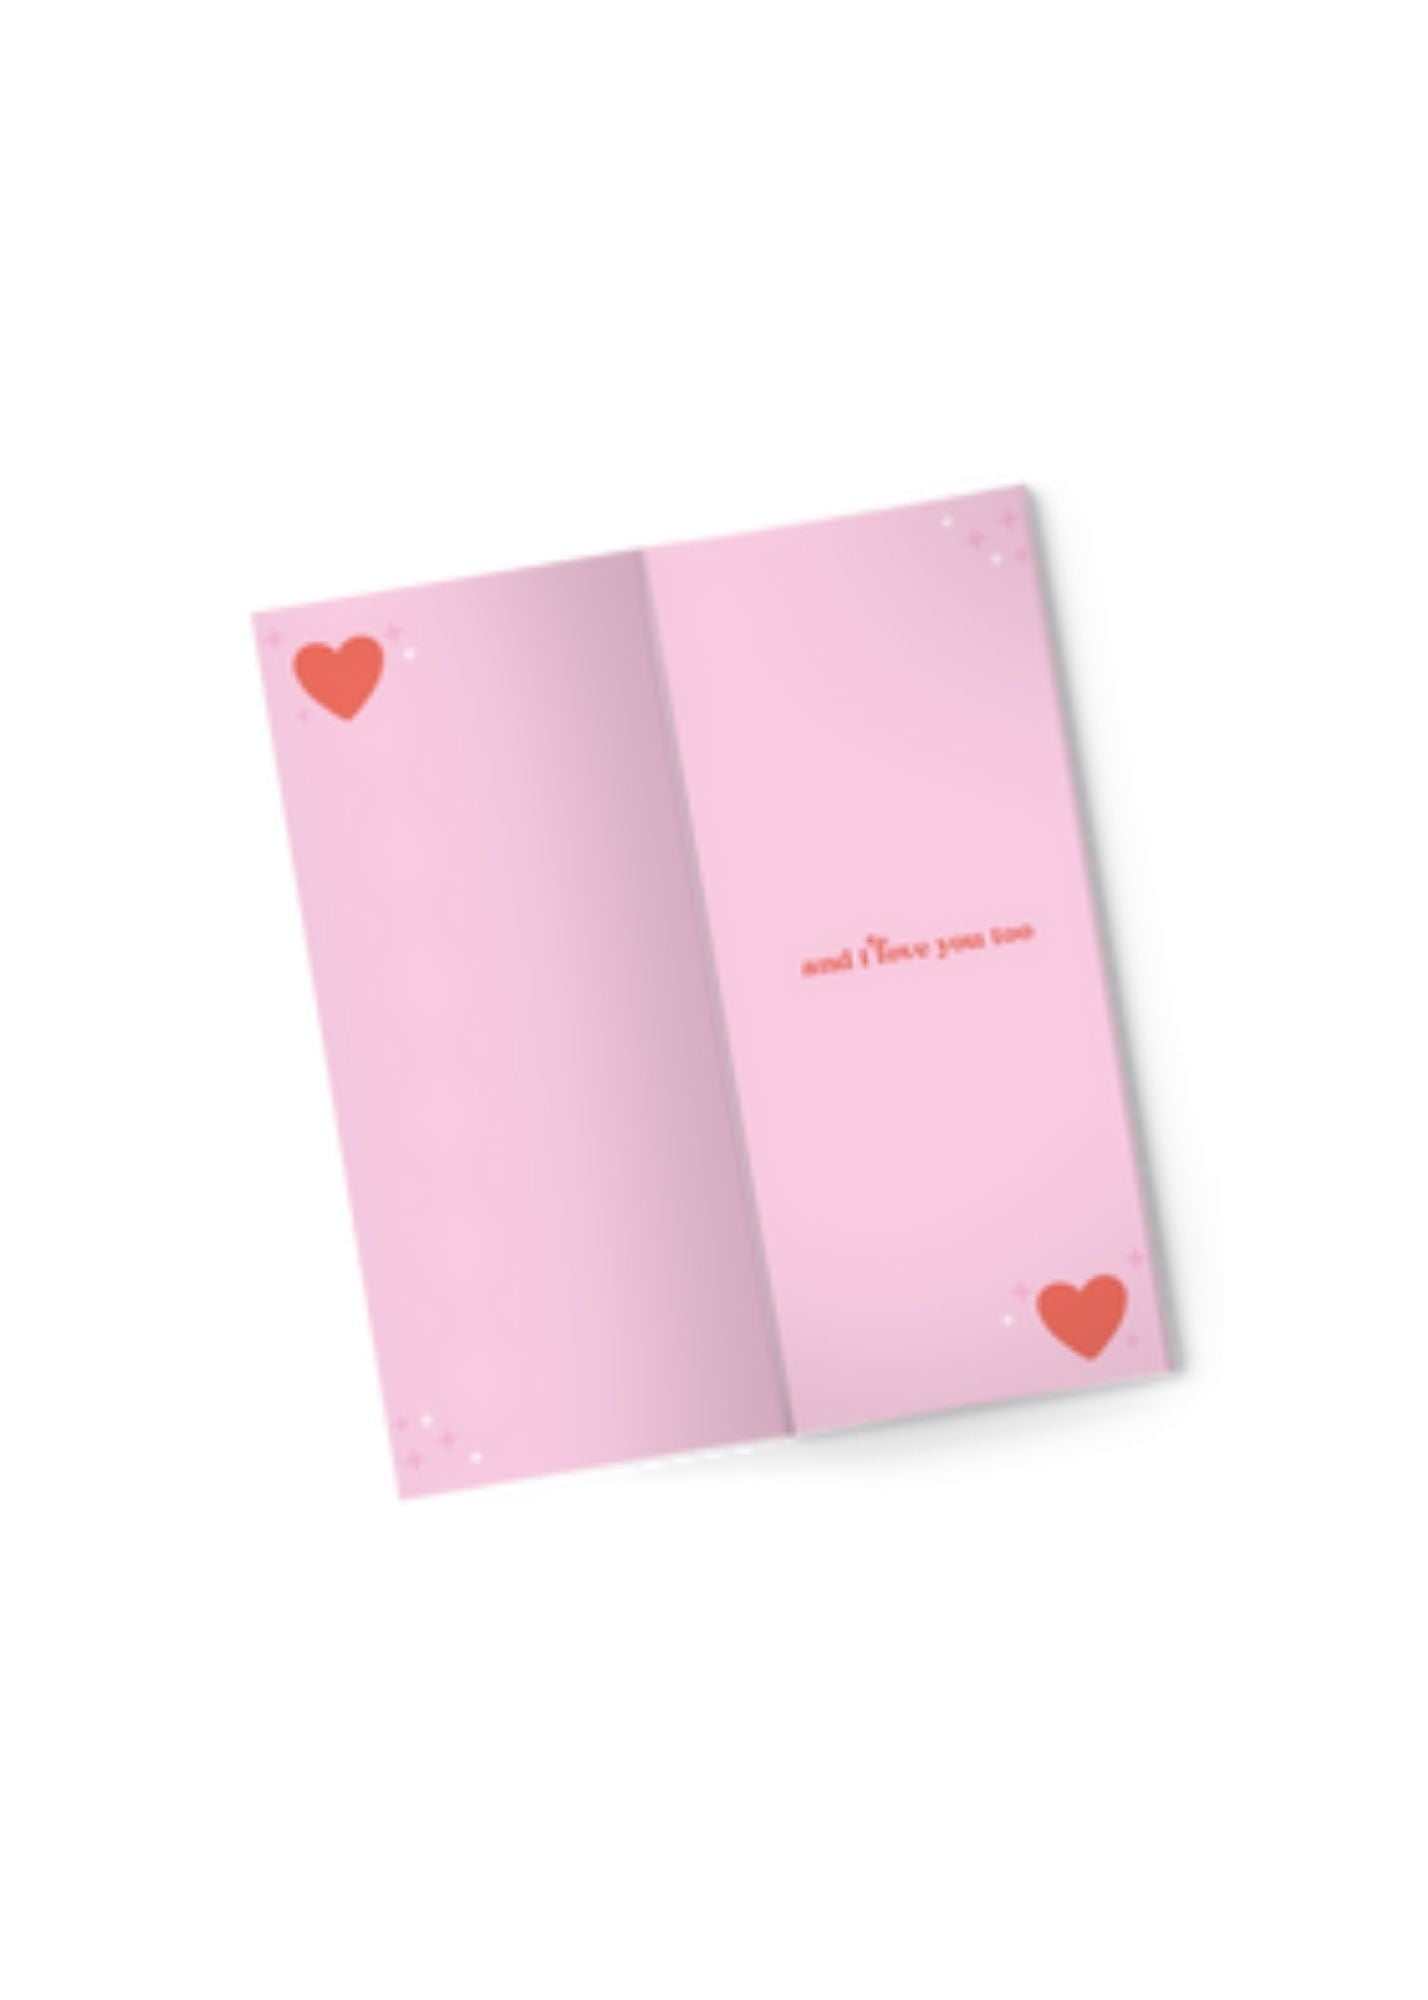 How Sweet It is to Be Loved by You Chocolate Greeting Card Home & Lifestyle Sweeter Cards - Chocolate Bar Greeting Cards